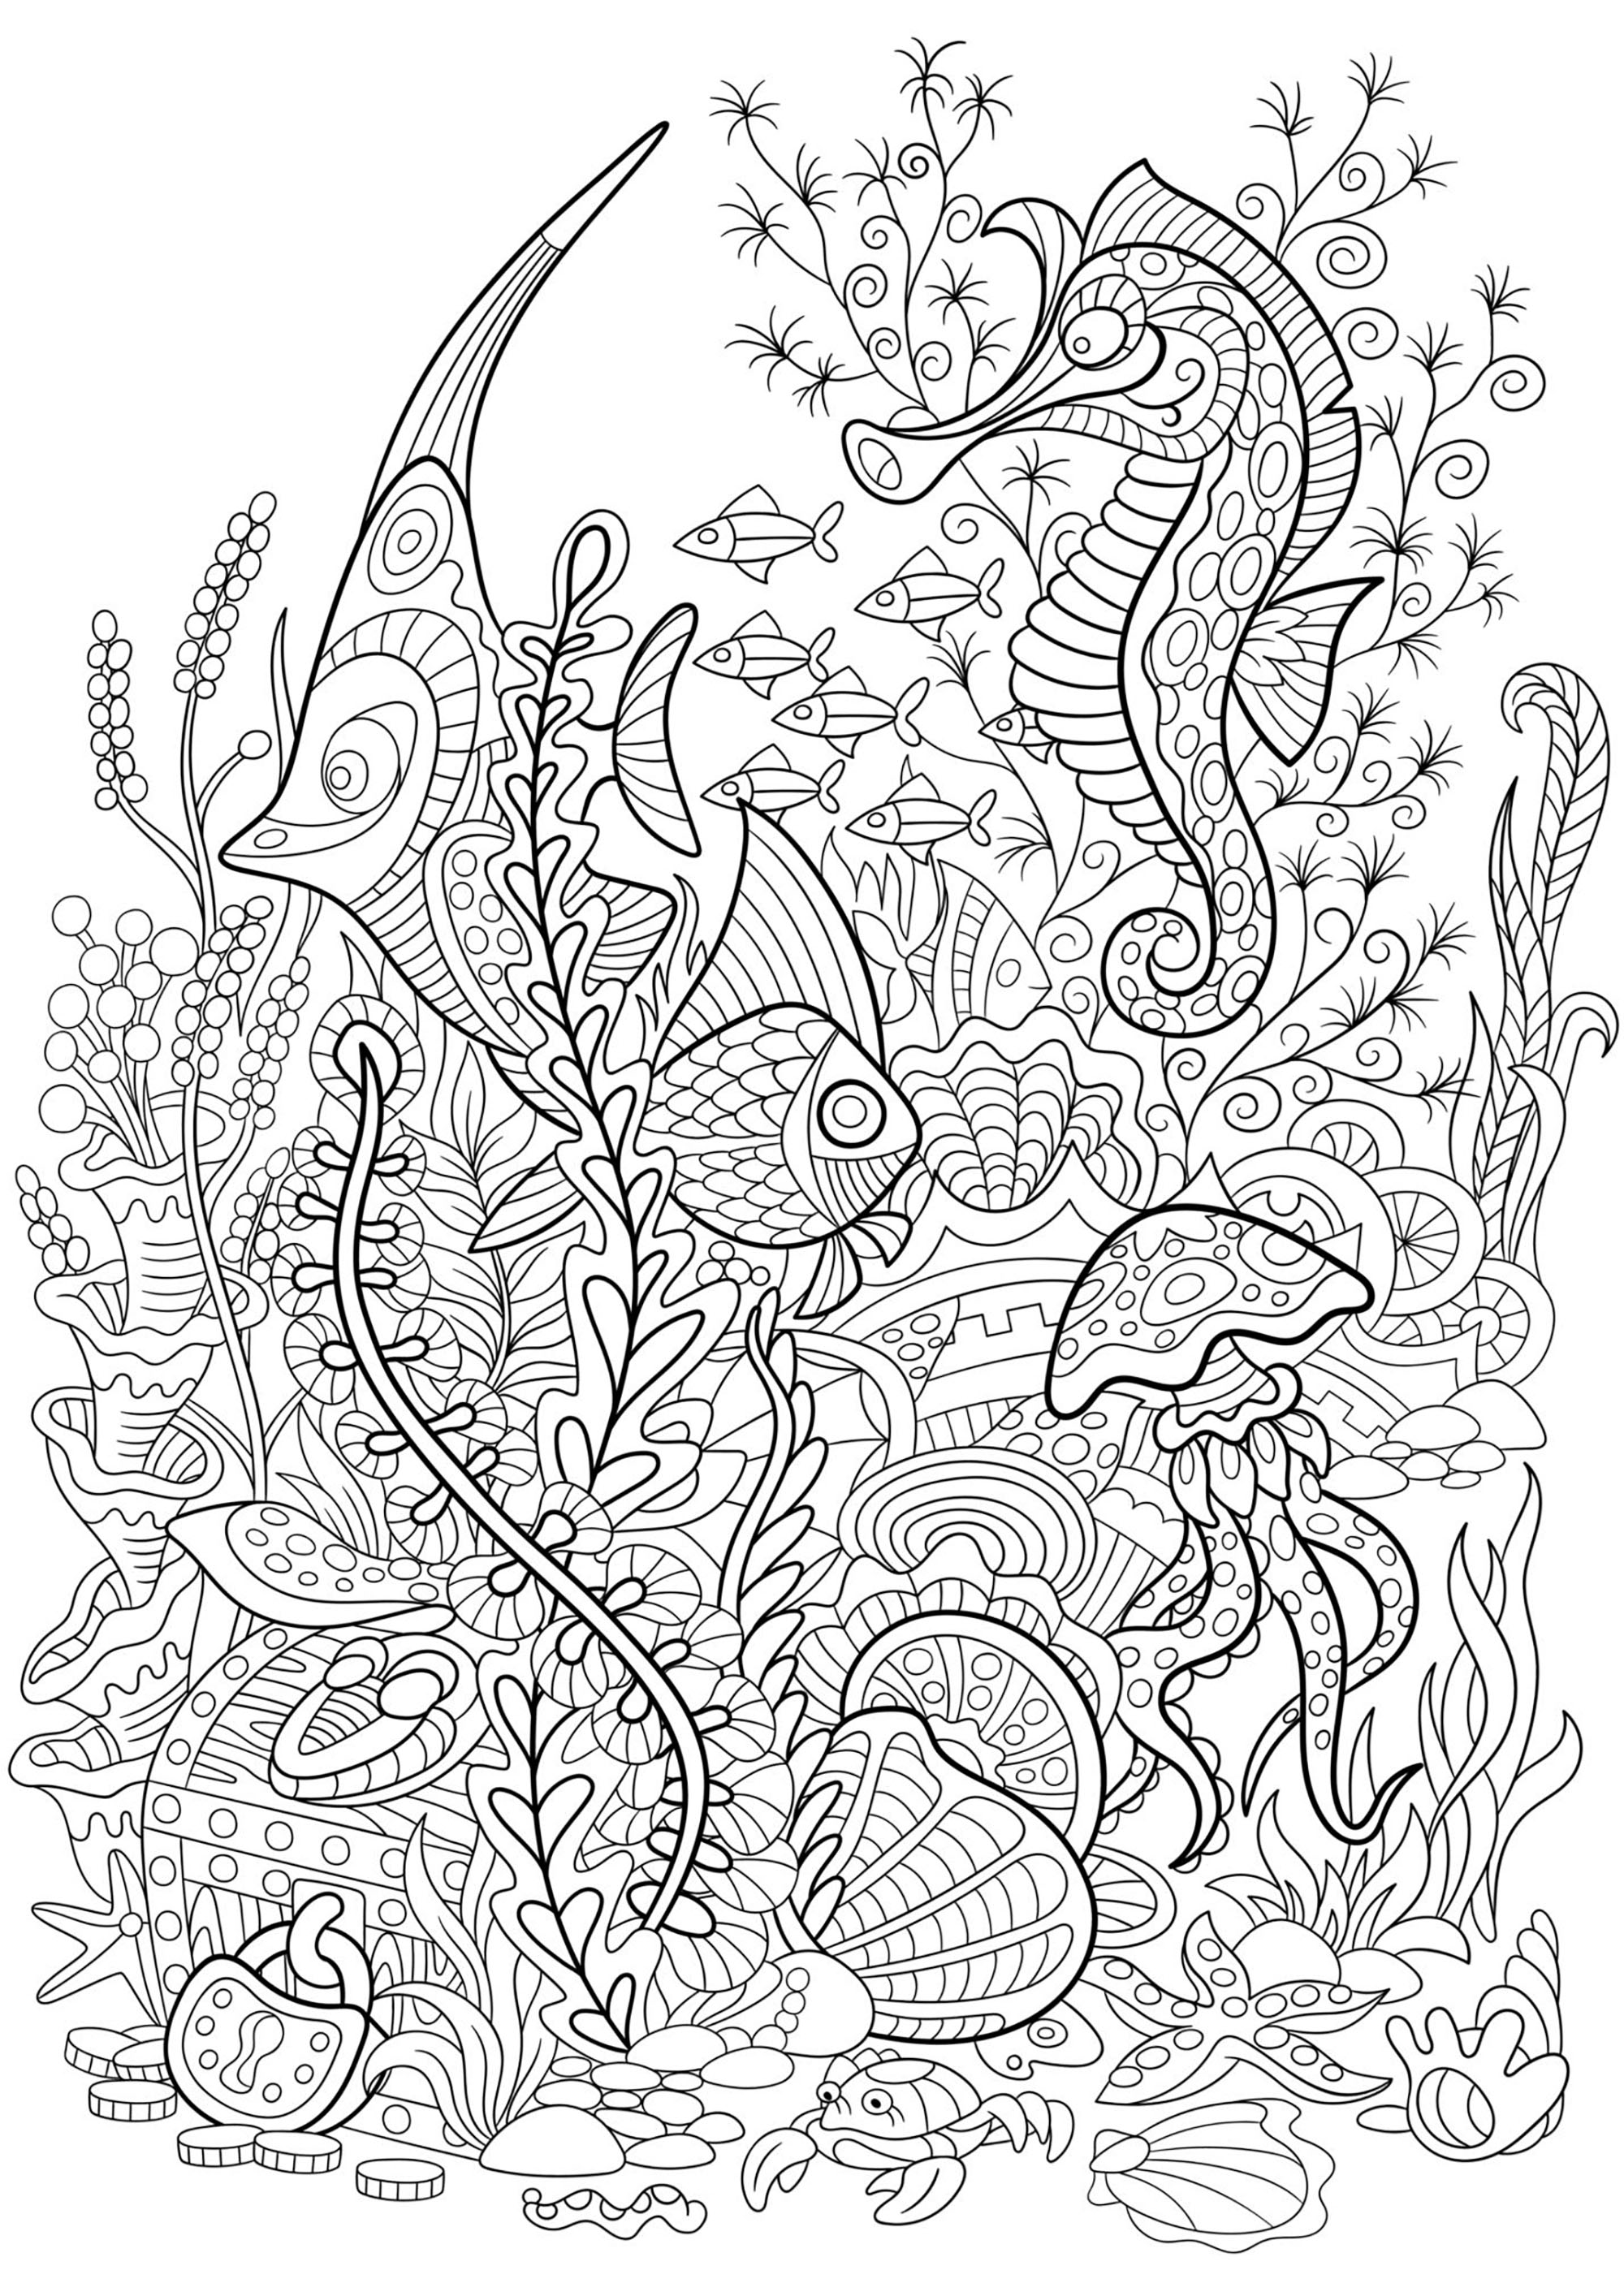 adults coloring book funny animals birds ocean fun: Animals, Birds, Ocean  Creatures in Nature Anti-Stress Coloring Books for Adults of All Ages from